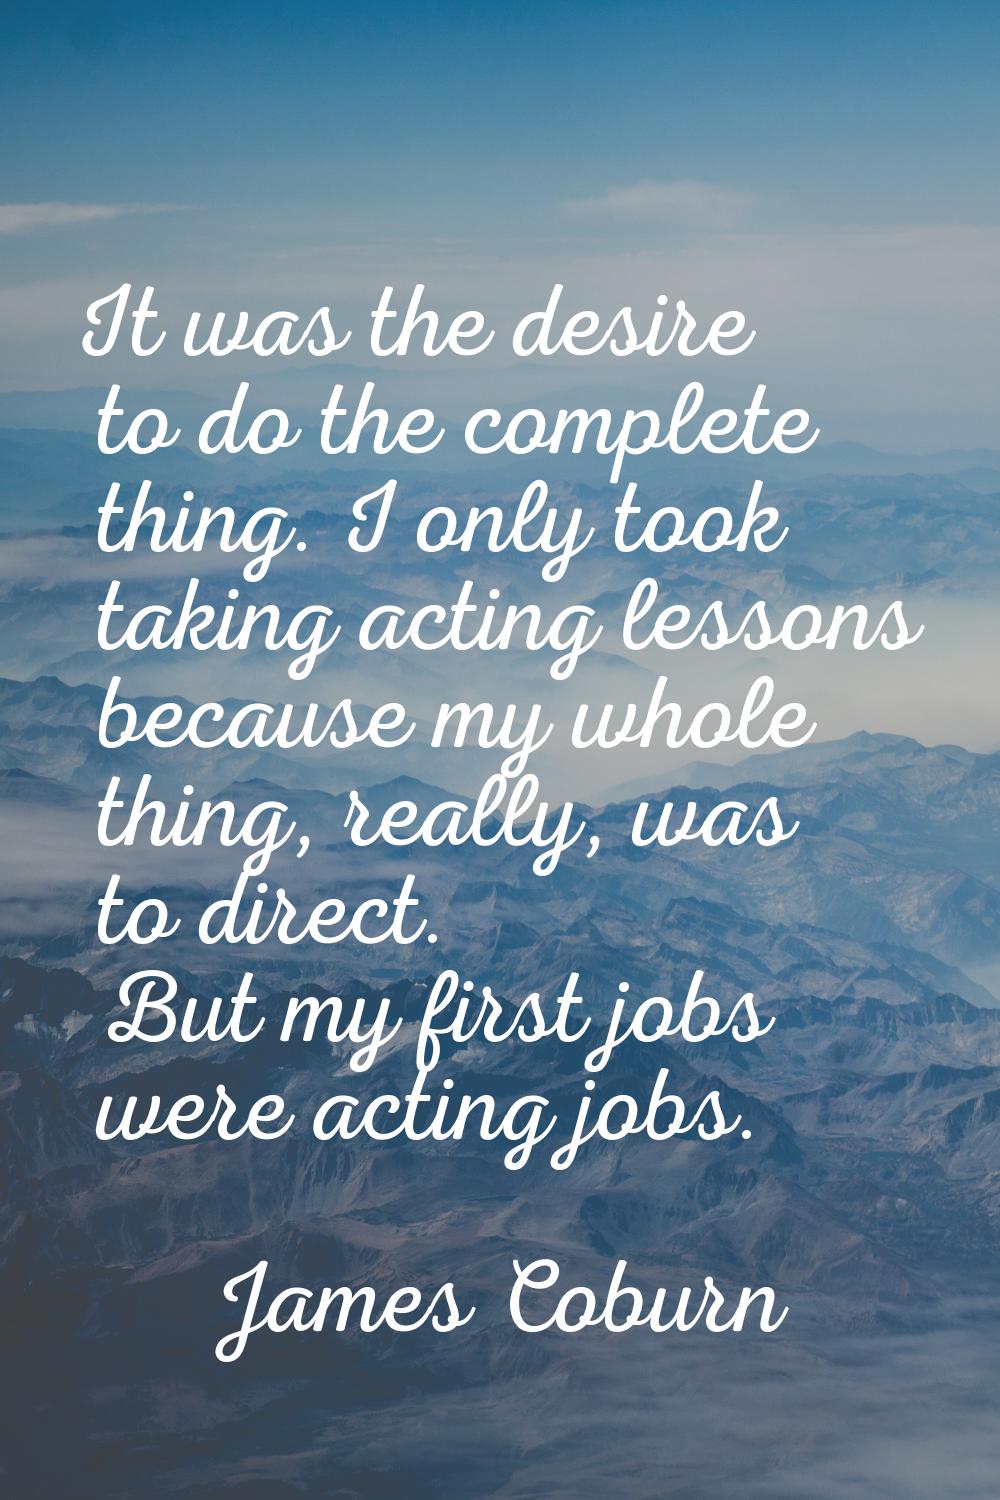 It was the desire to do the complete thing. I only took taking acting lessons because my whole thin